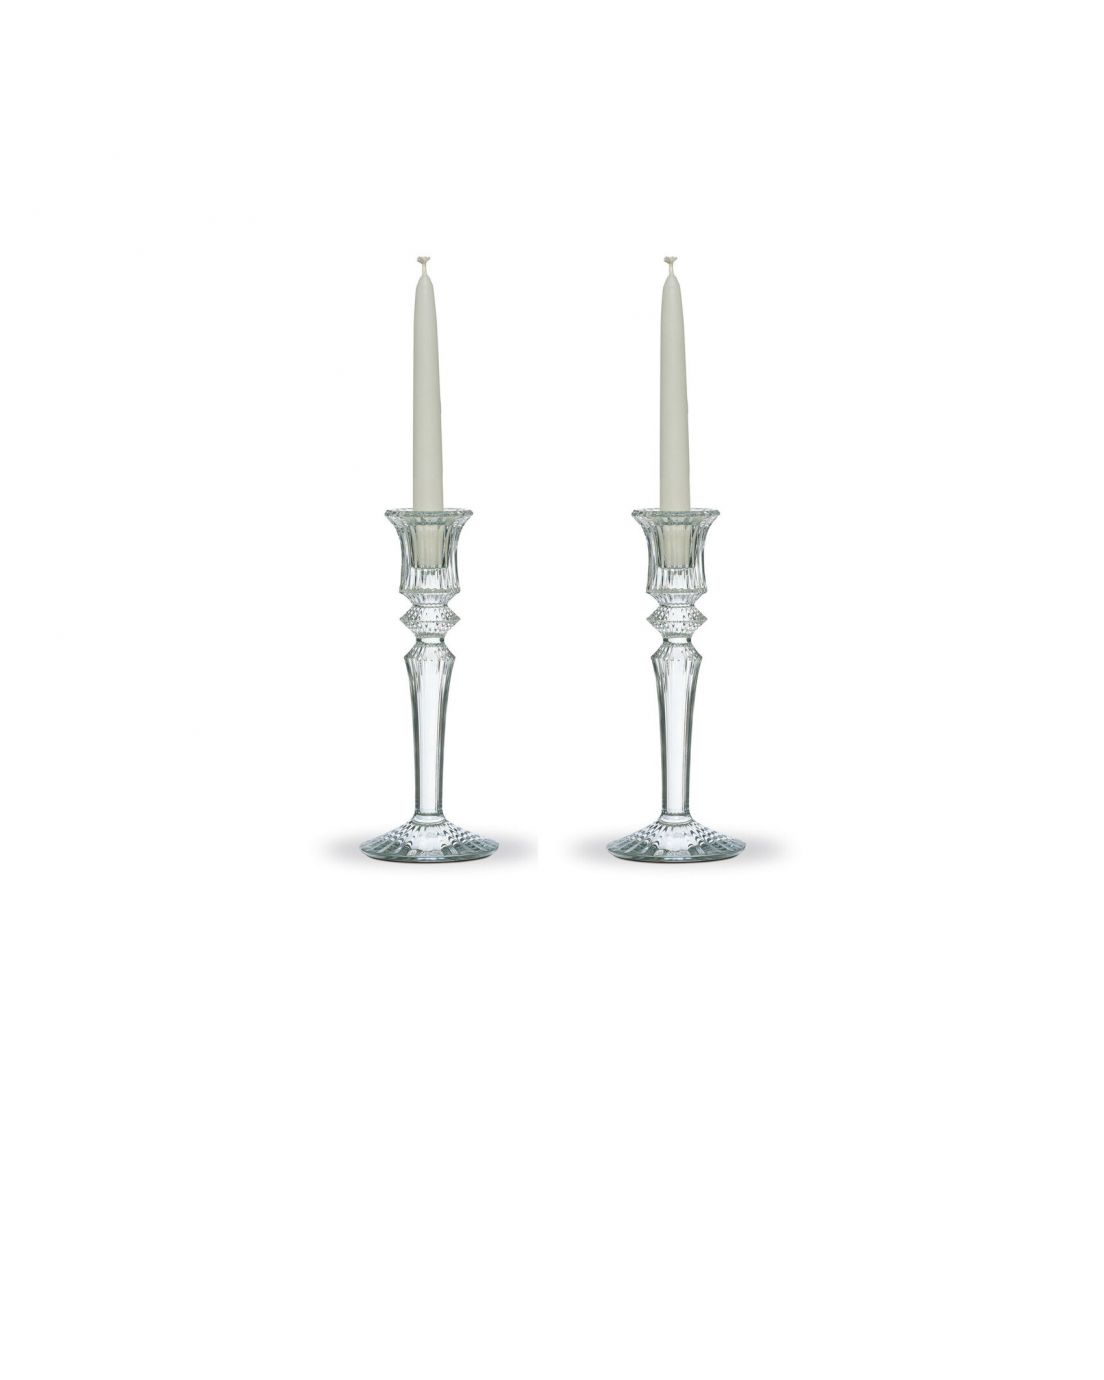 Mille Nuits Candlestick, Set of 2